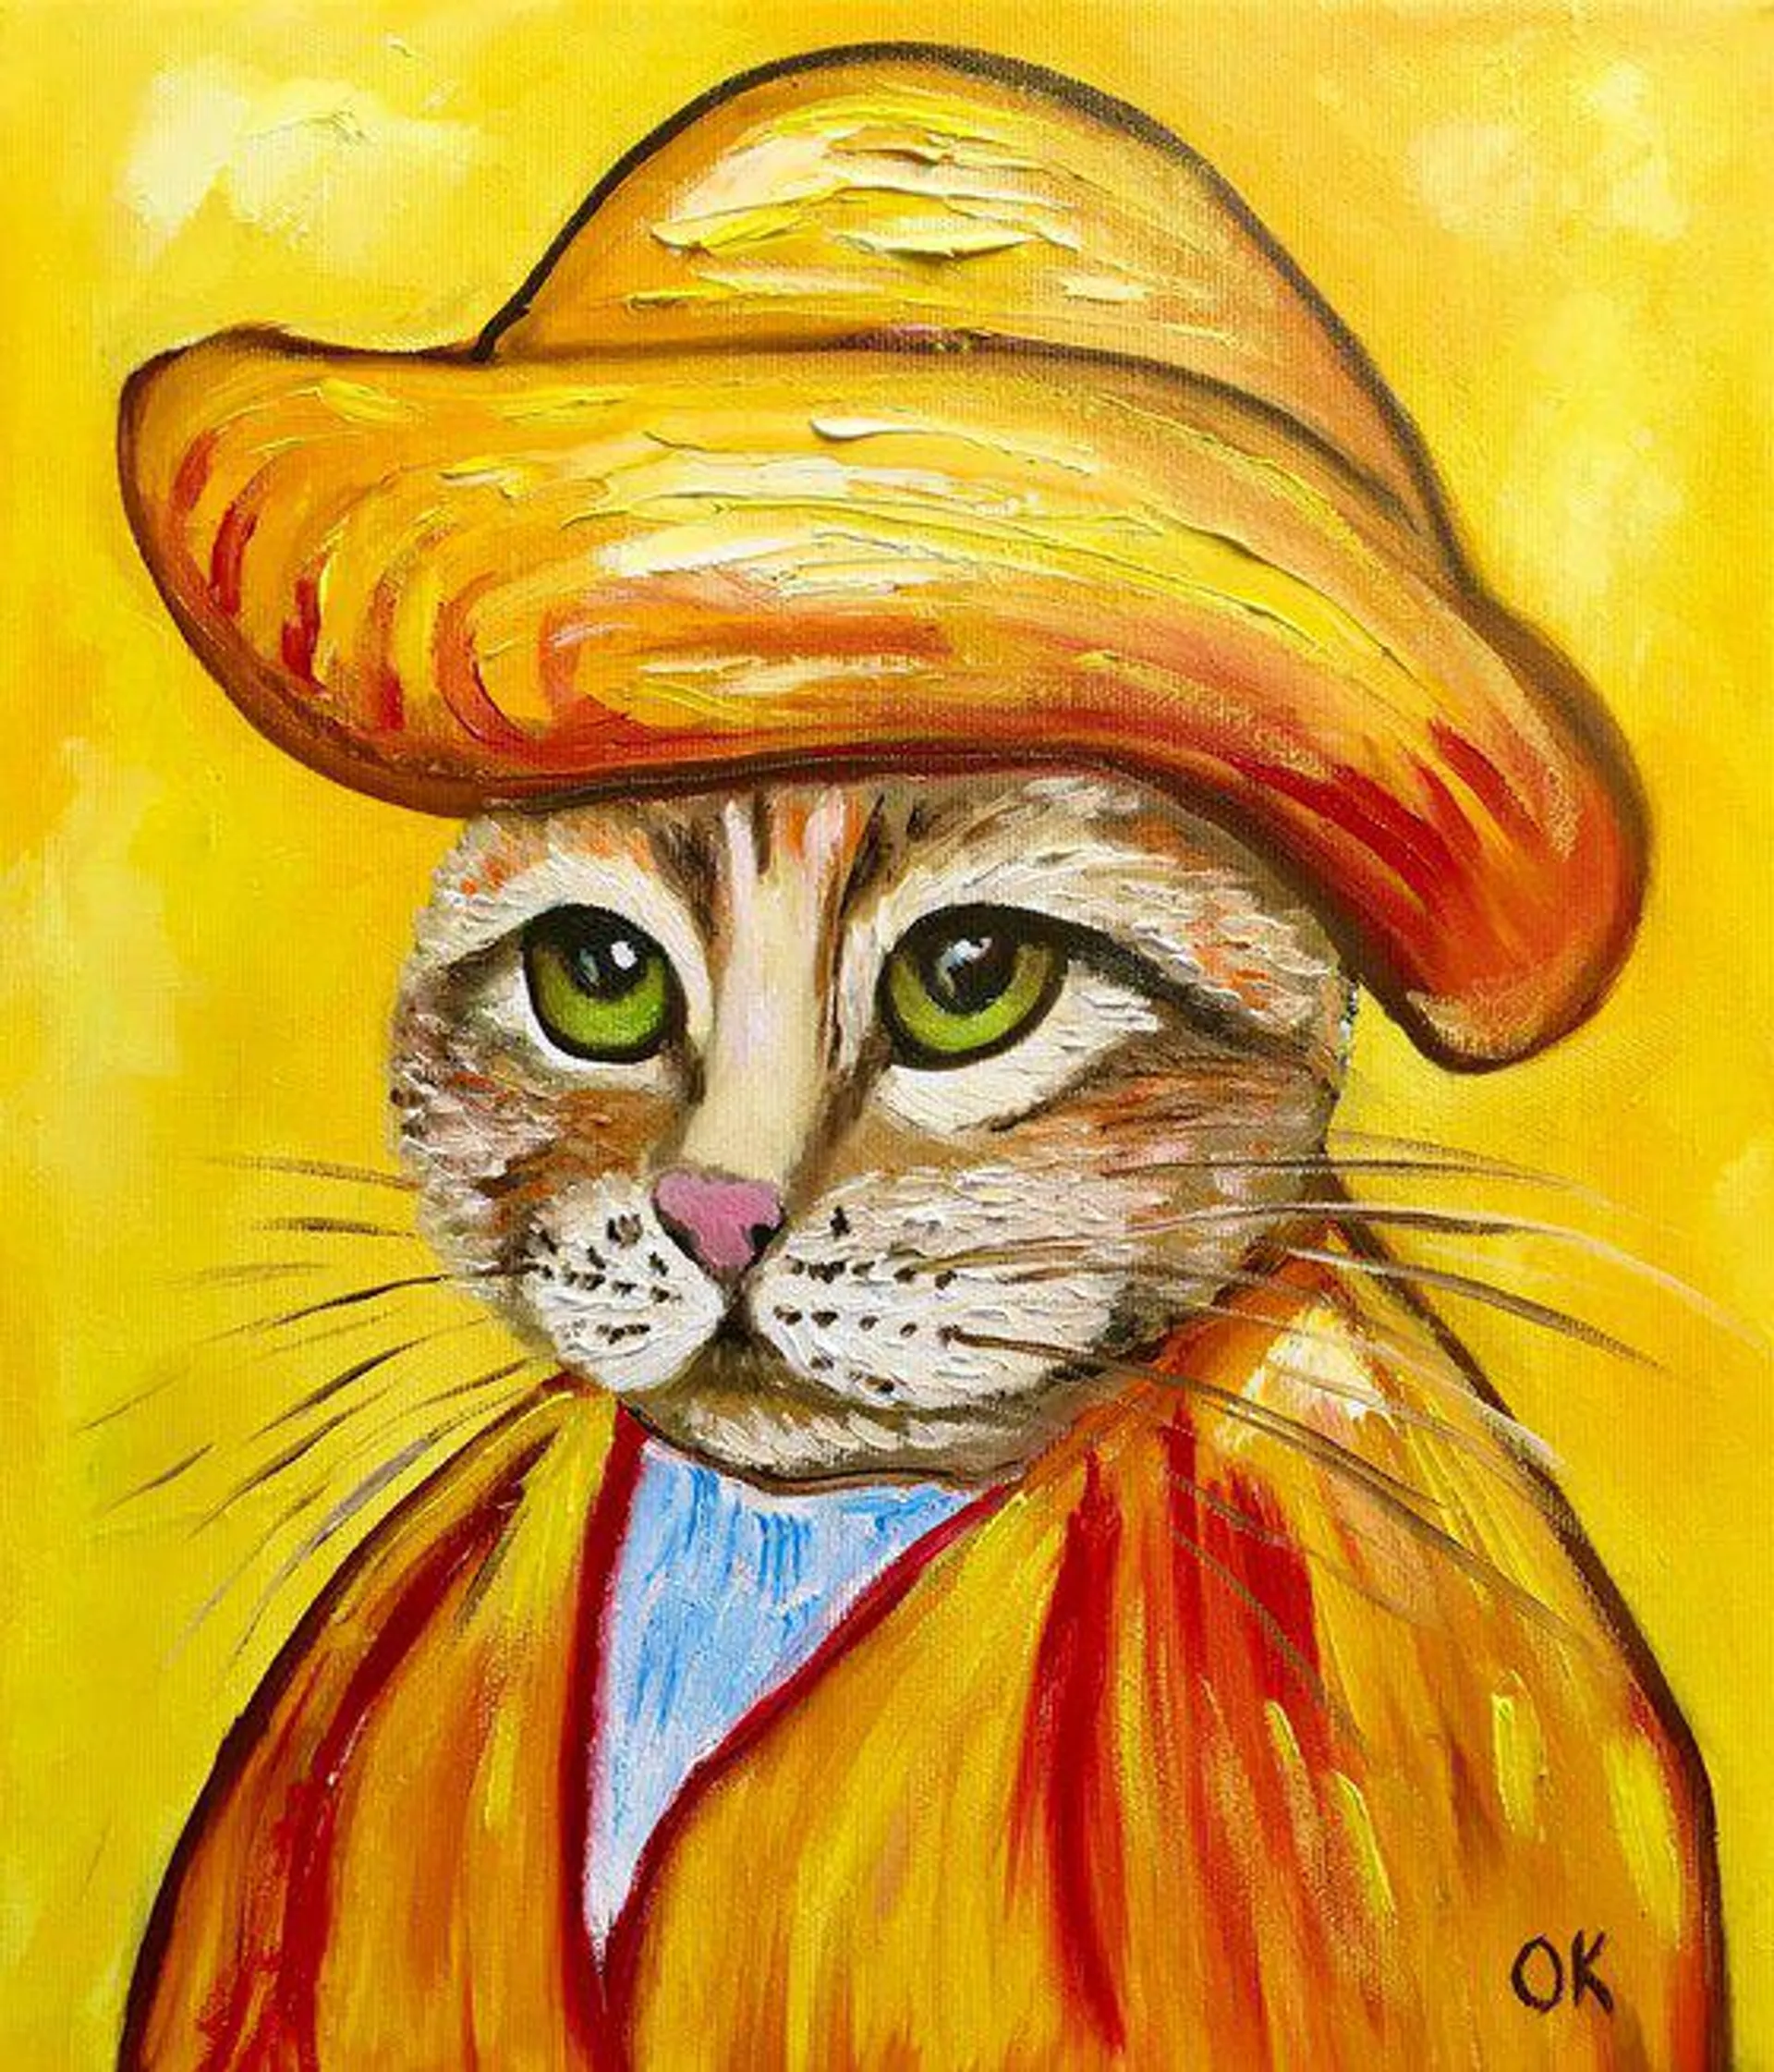 Cat, Vincent Van Gogh inspired by his self-portrait. (2022)